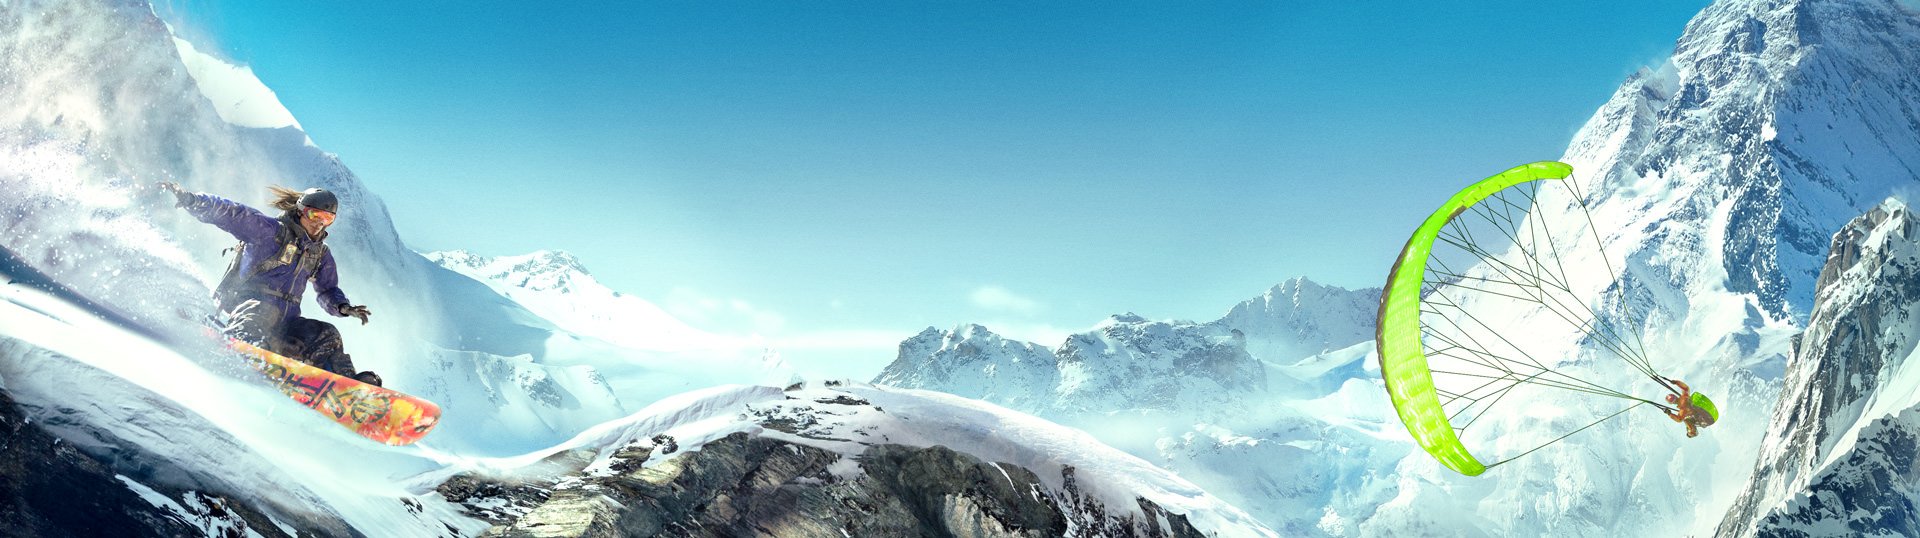 Buy Steep Standard Edition for PS4, Xbox One and PC | Ubisoft Official Store